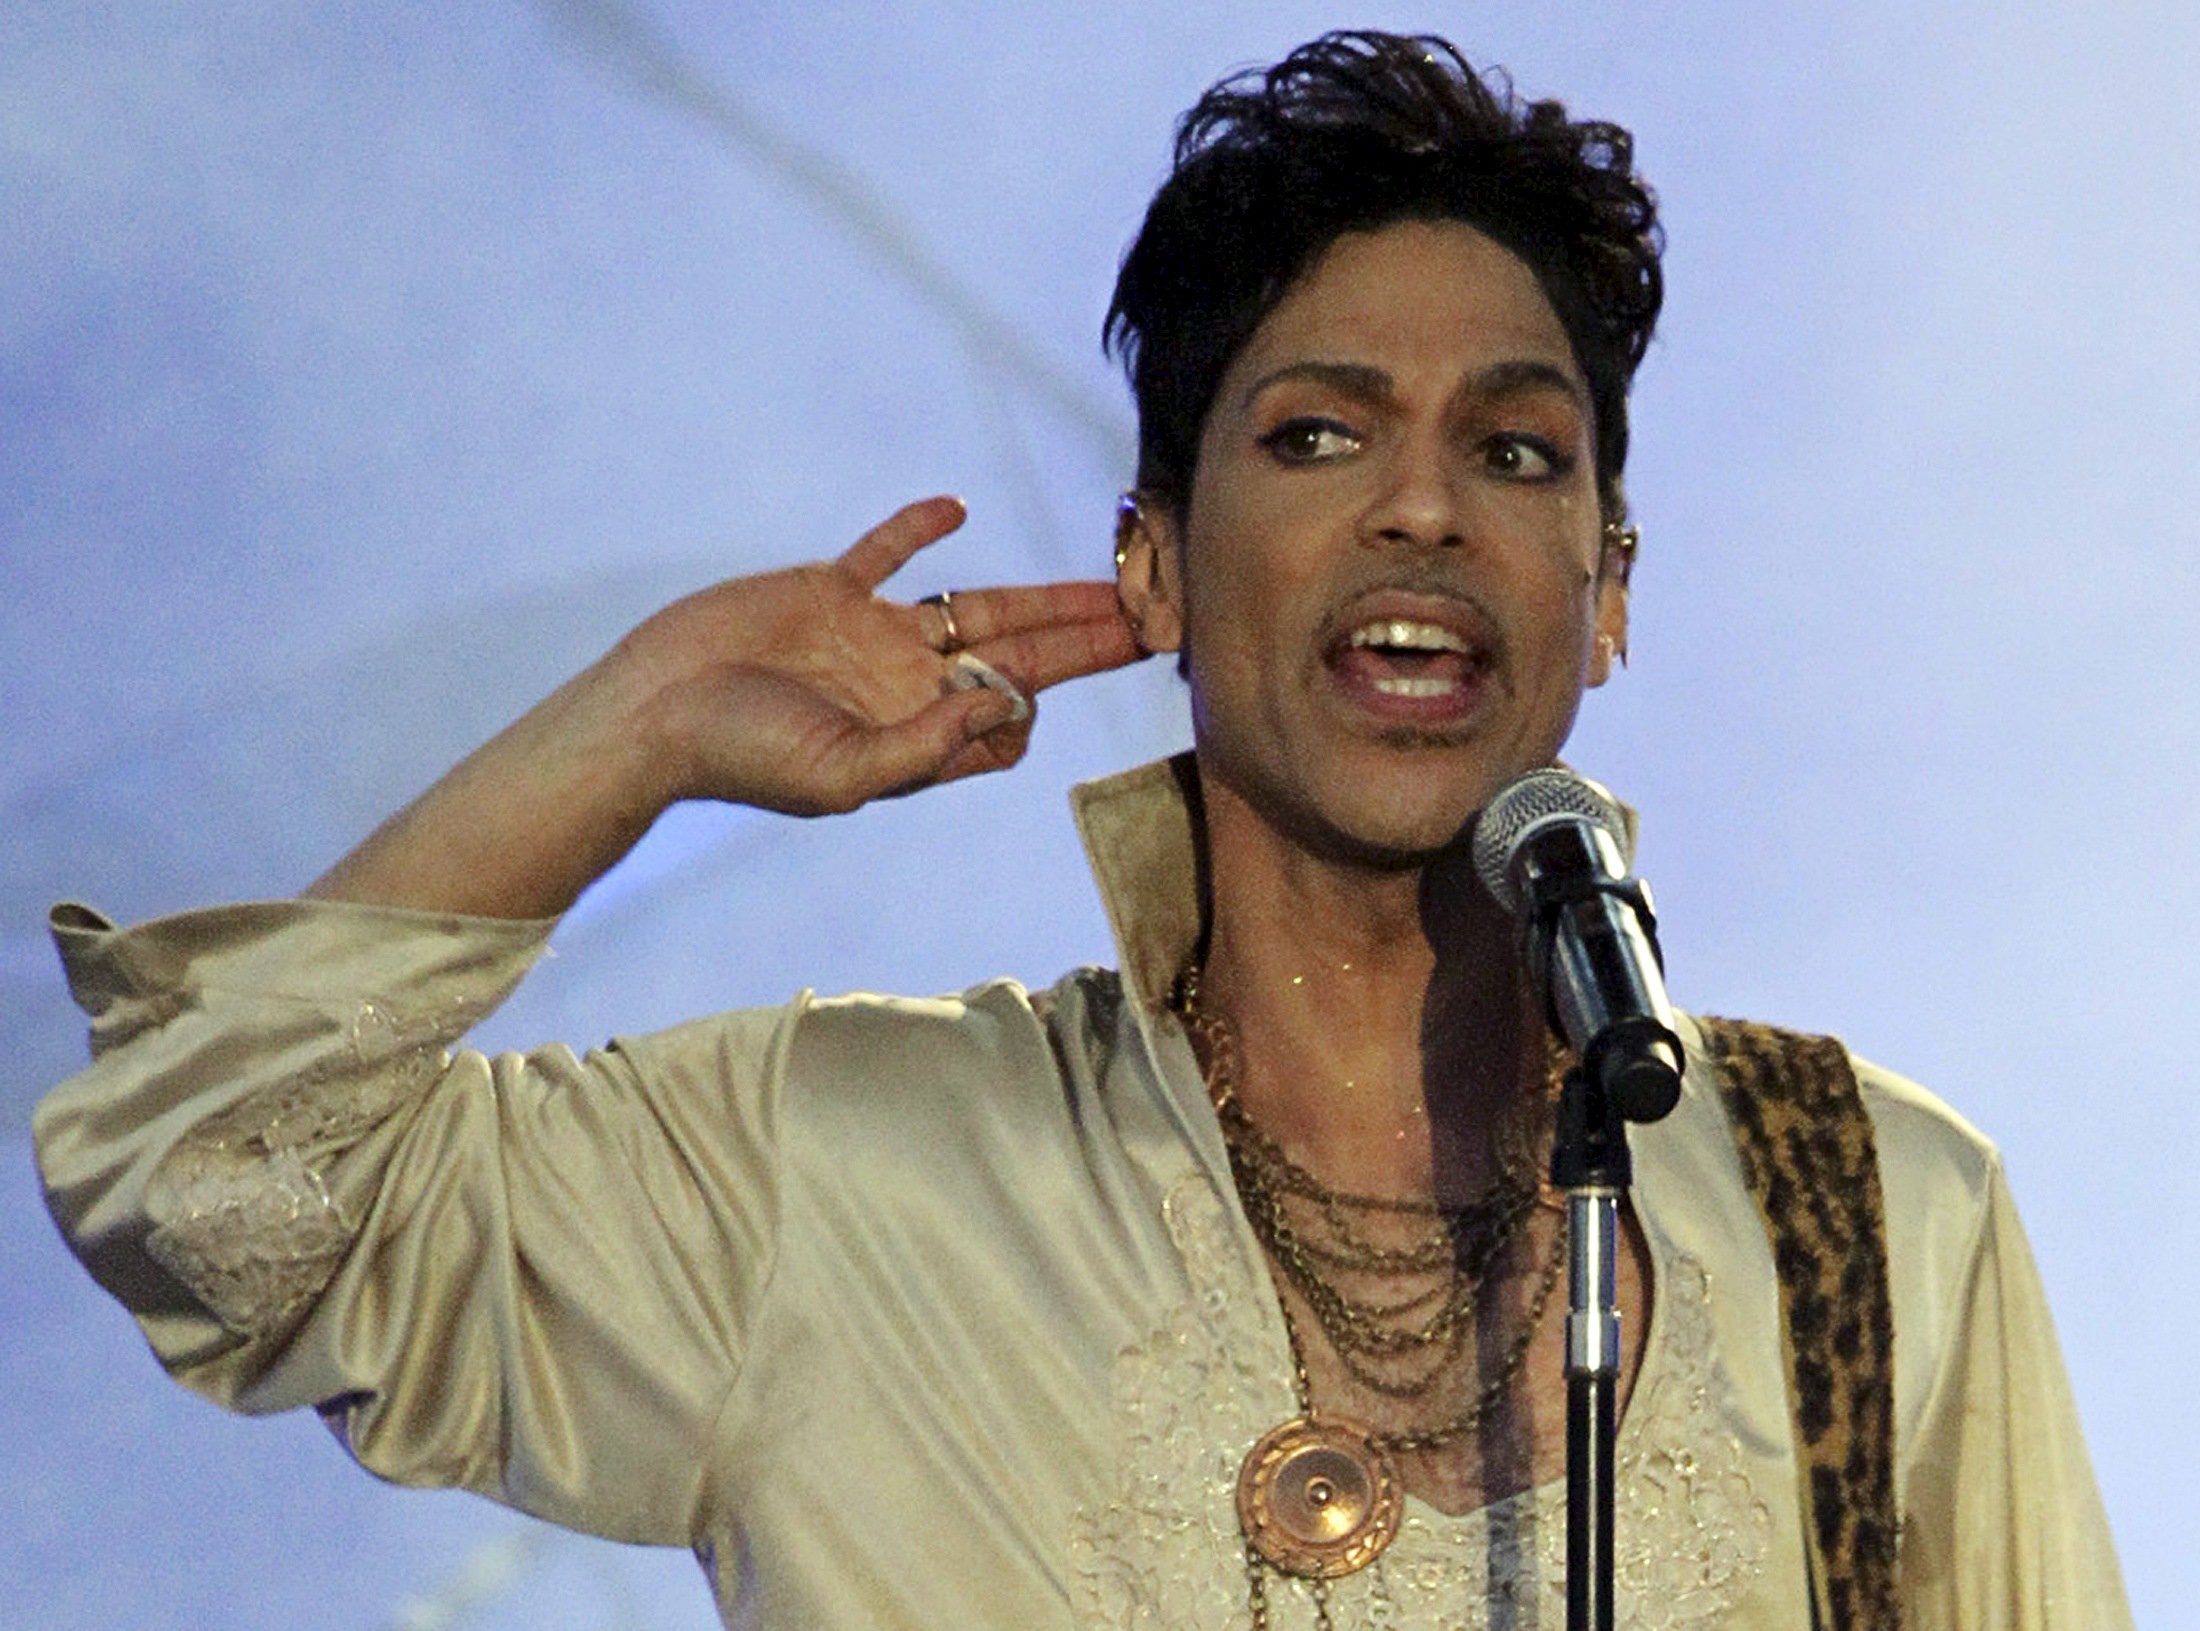 Prince performs at the Hop Farm Festival near Paddock Wood, England in 2011. Photo: Reuters